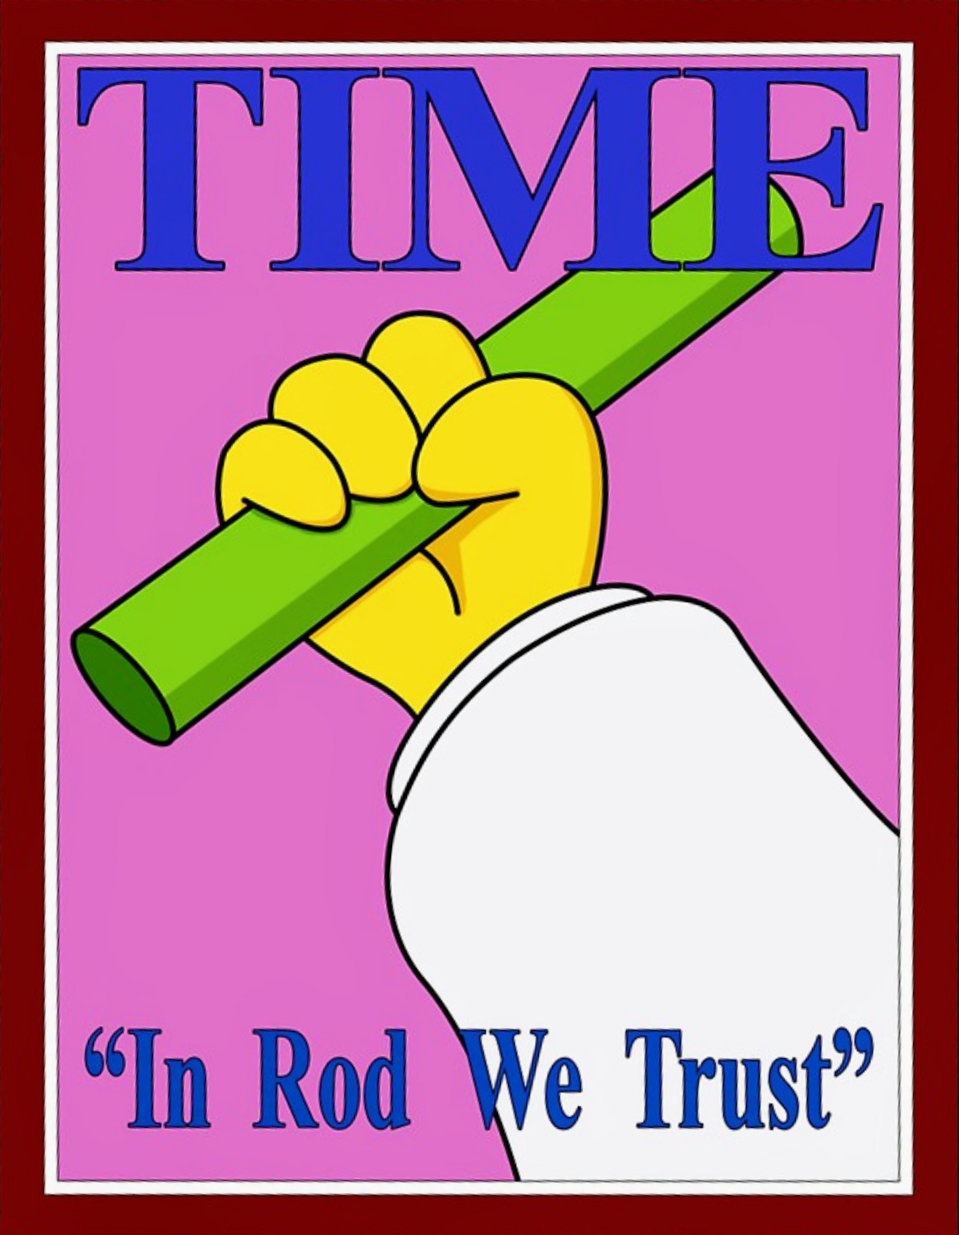 Memorable Simpsons Quotes -  inanimate carbon rod - Time In Rod We Trust